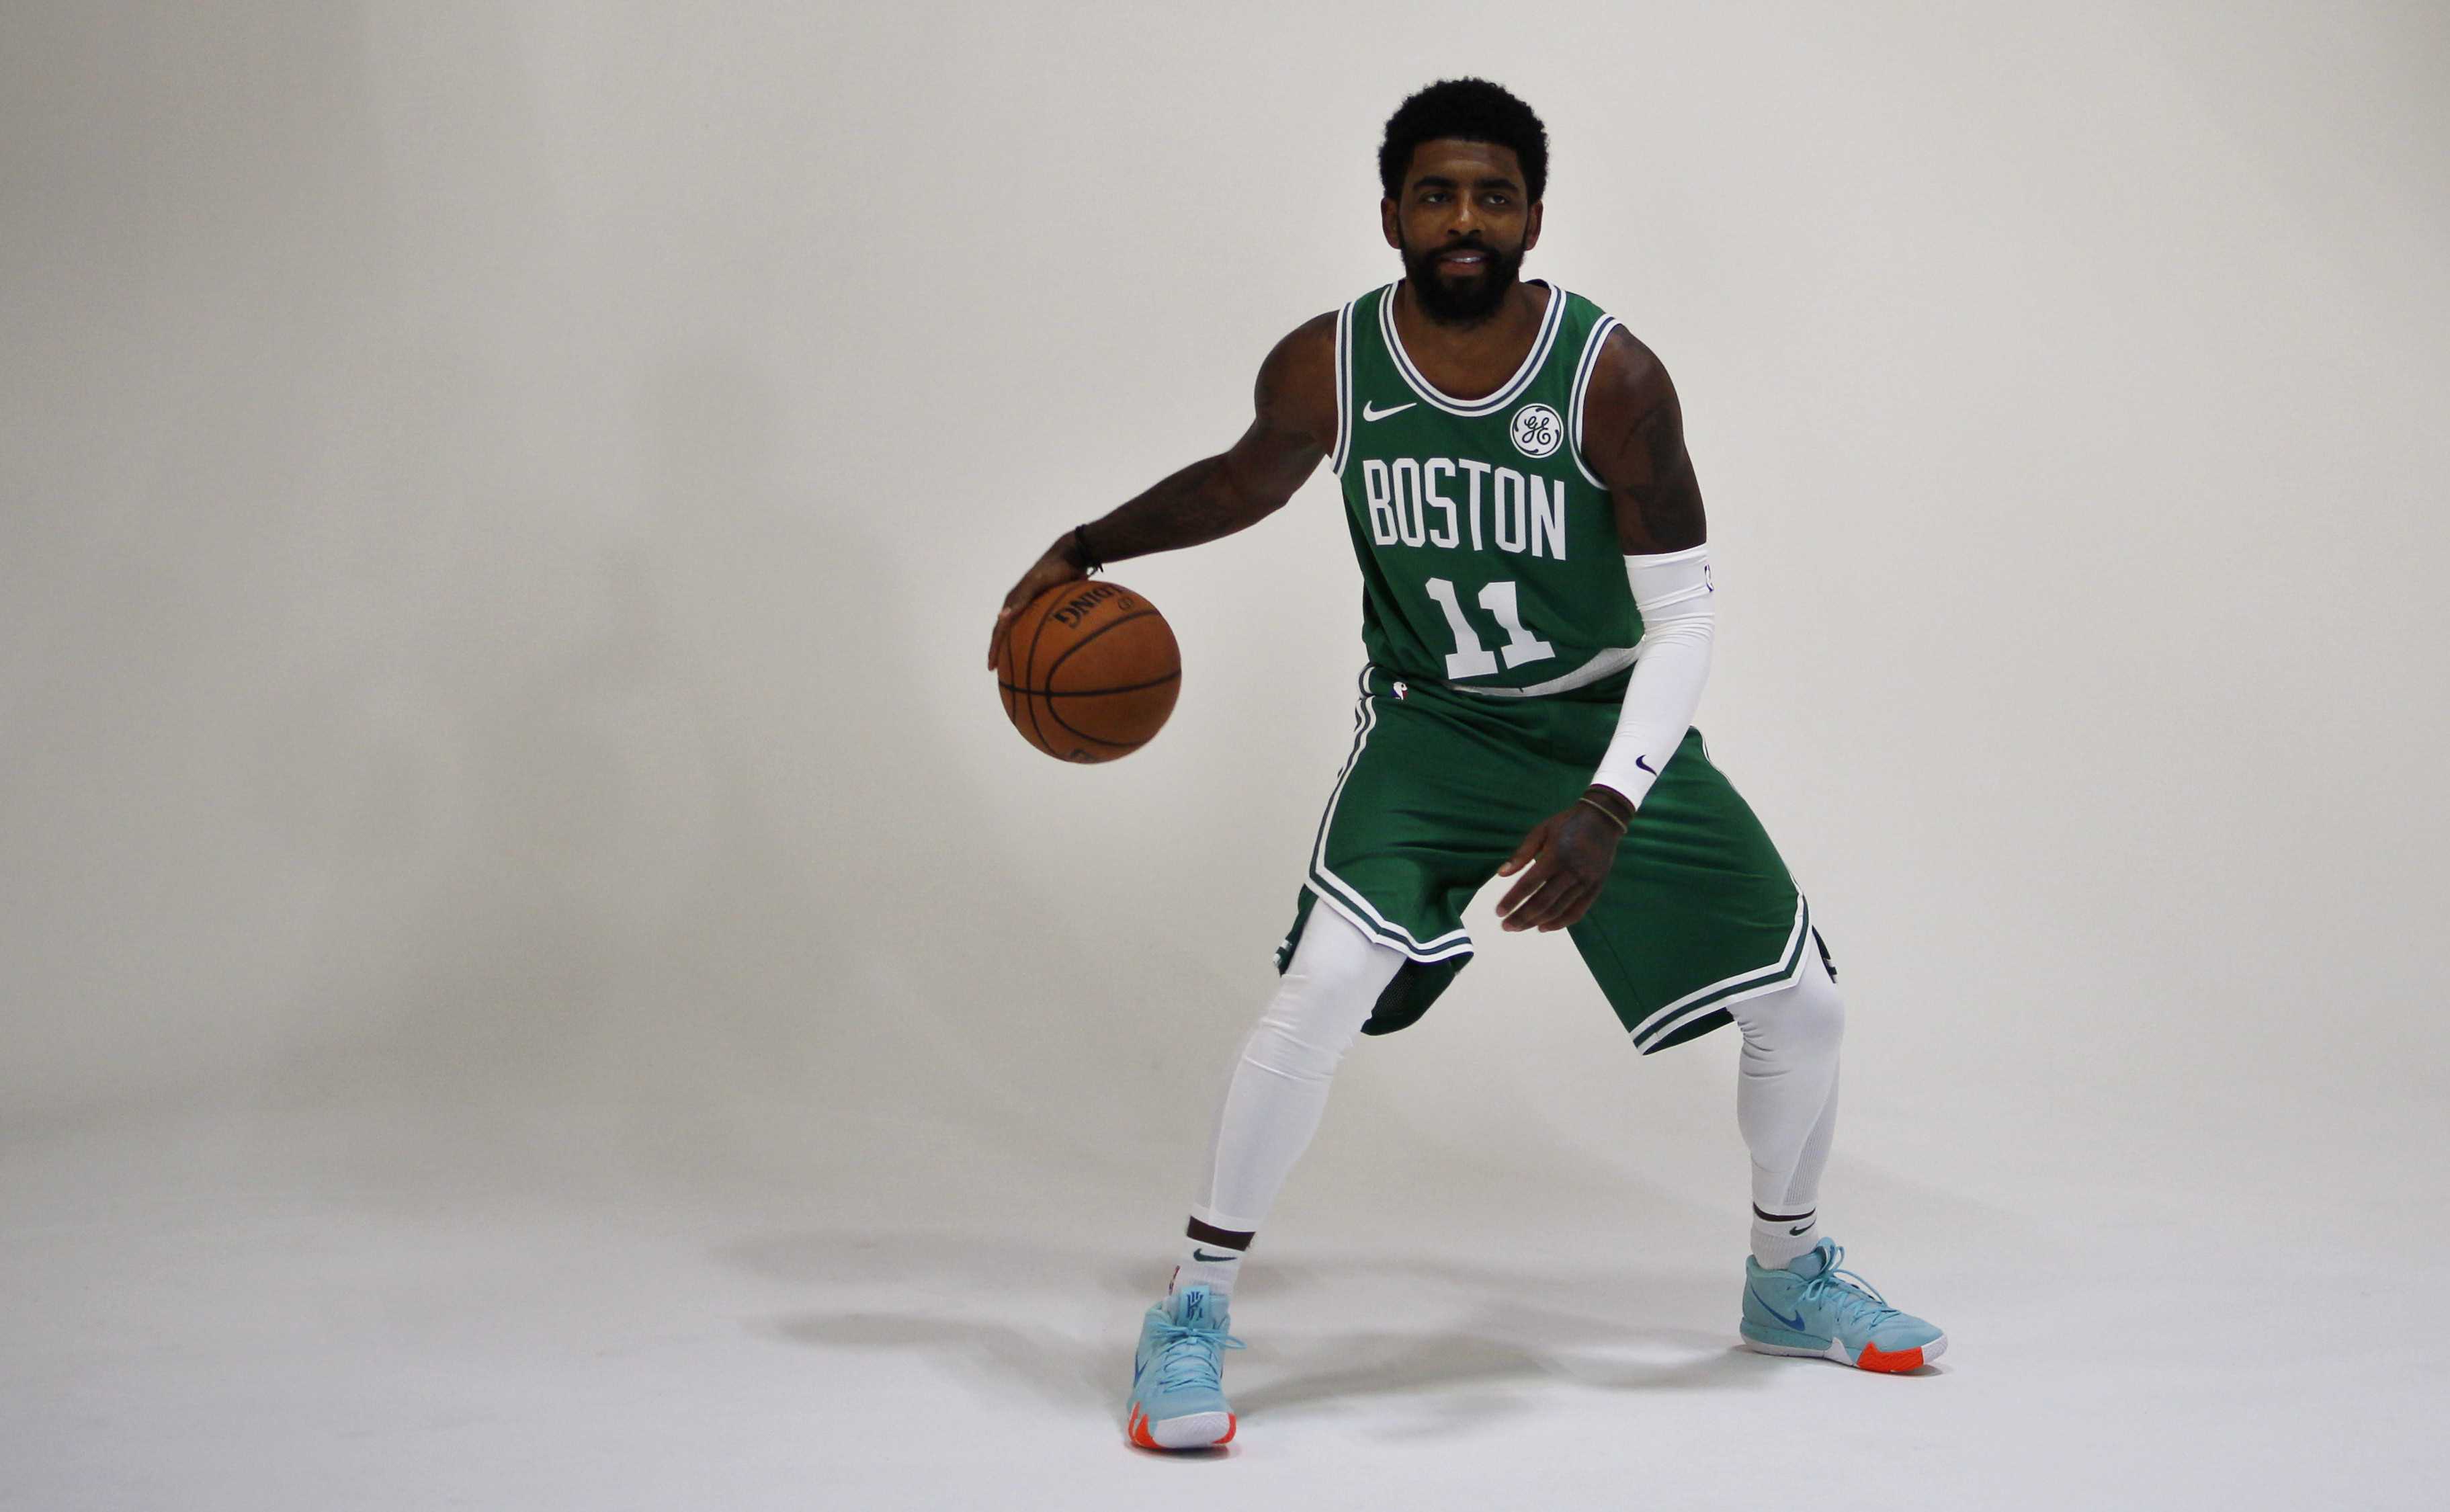 Kyrie Irving in the Nike Kyrie 4